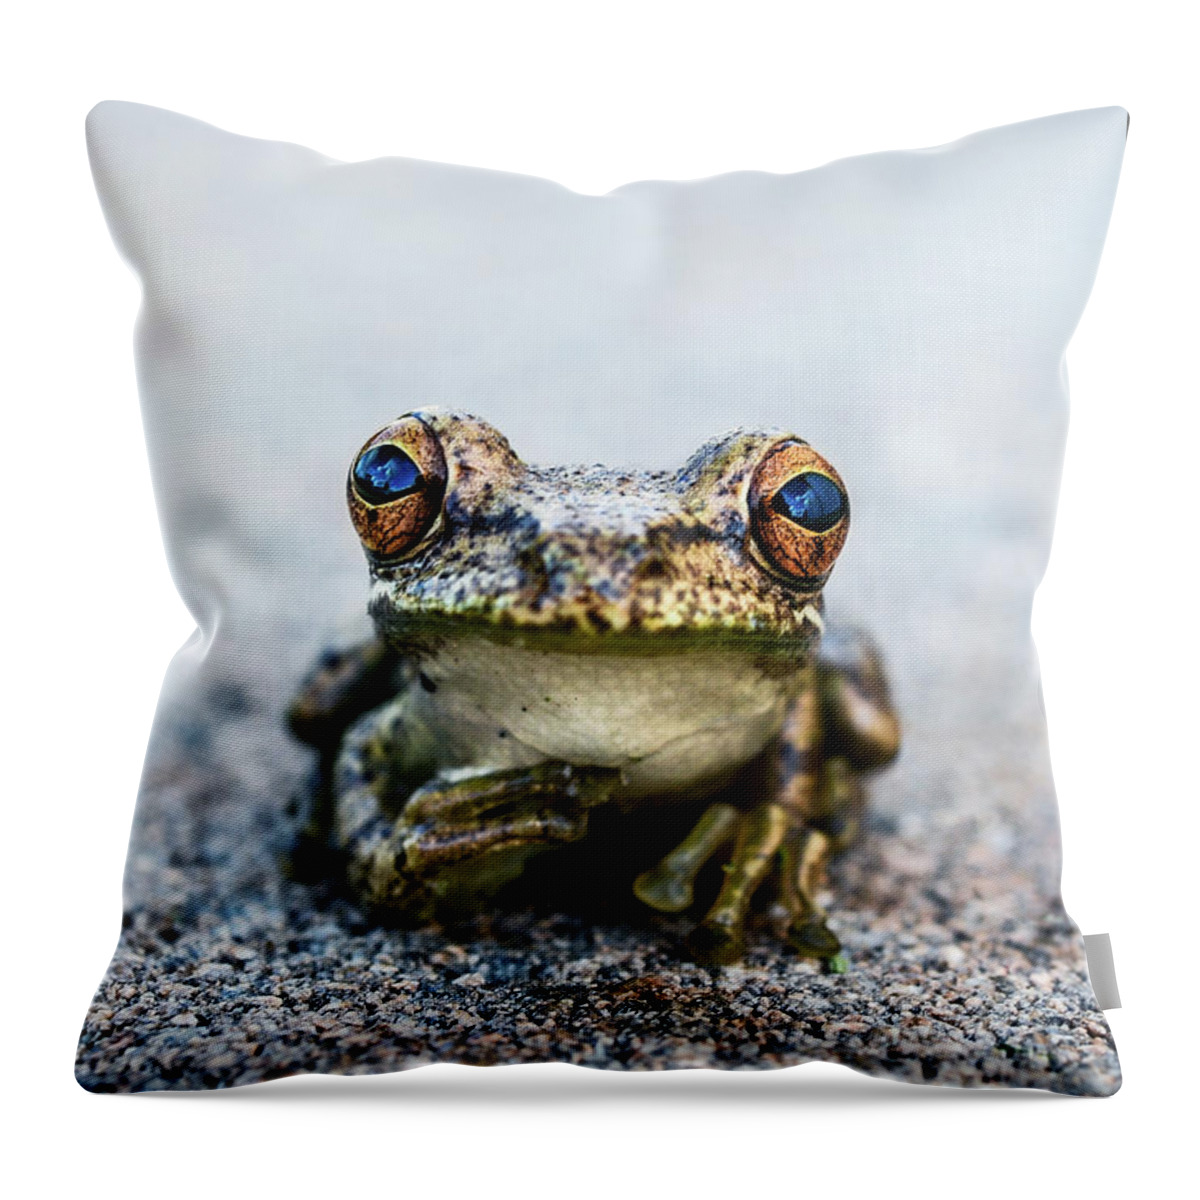 Animal Throw Pillow featuring the photograph Pondering Frog Too by Laura Fasulo